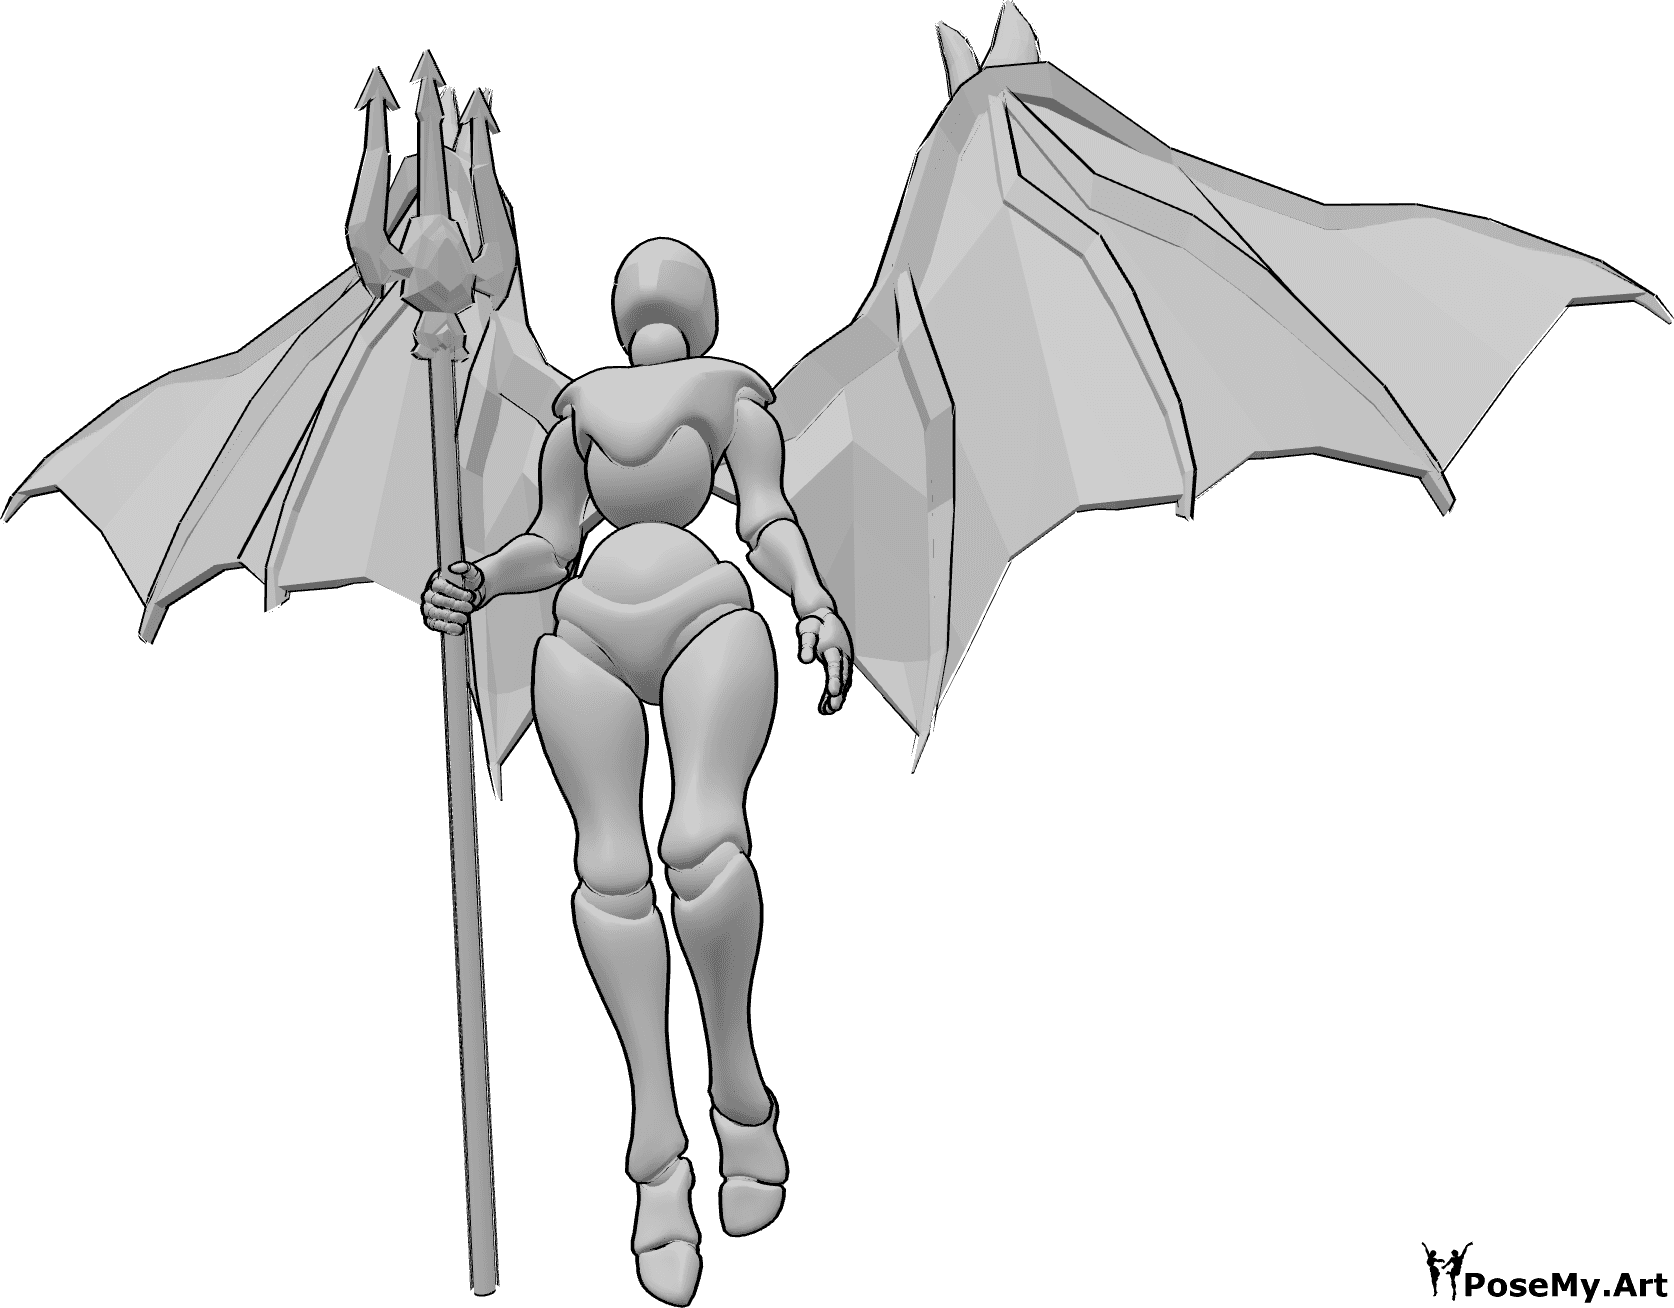 Pose Reference- Demon flying pose - Female with devil wings is flying upwards, holding the trident in her right hand and looking upwards